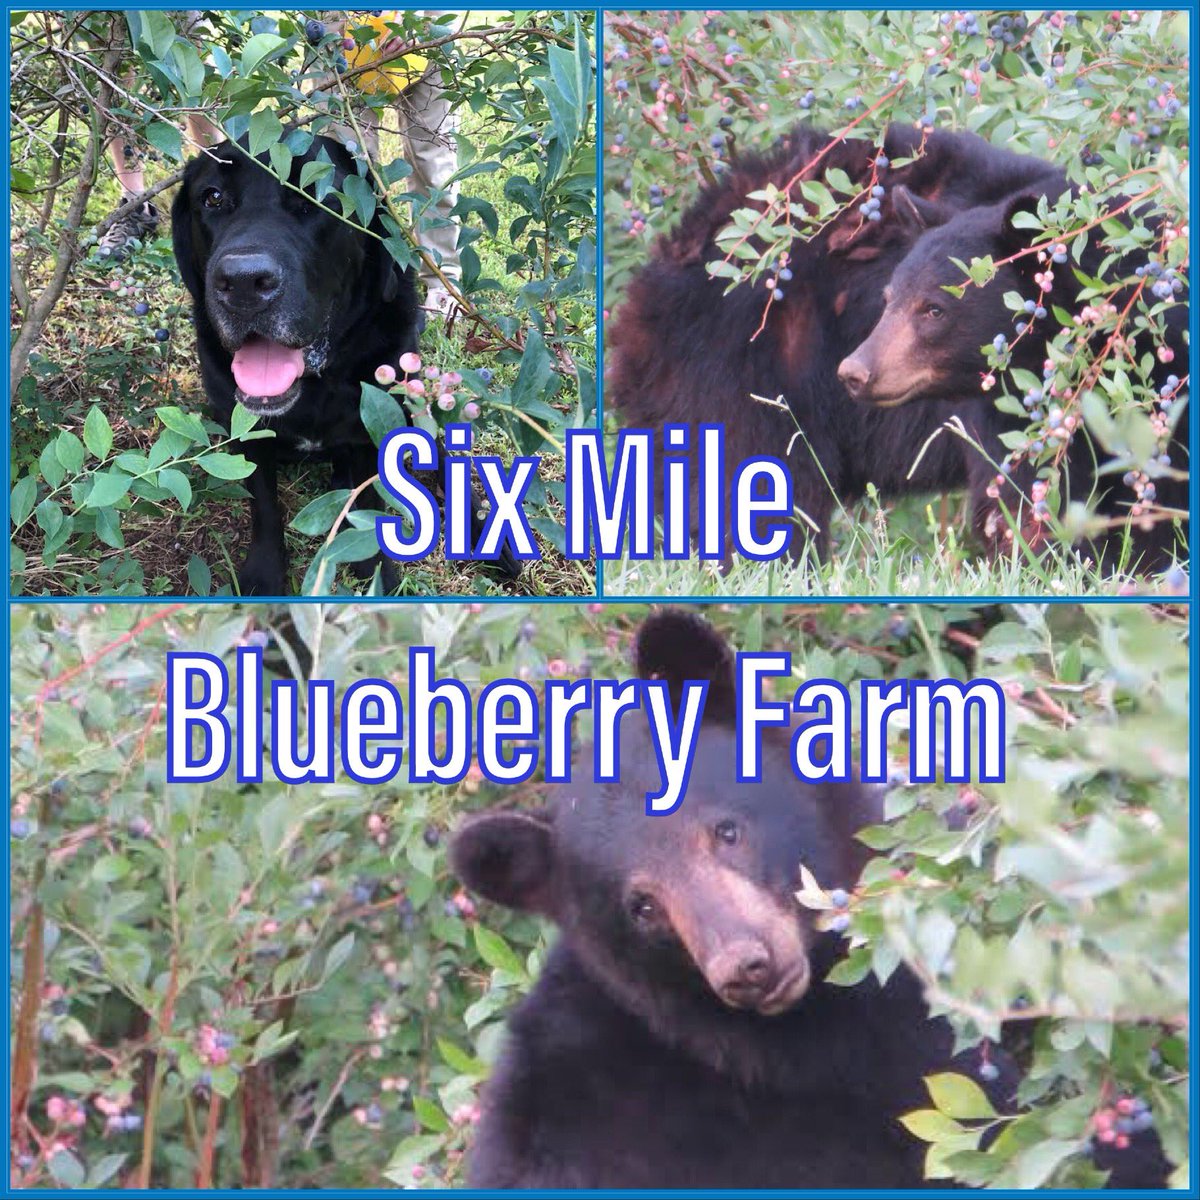 Everyone loves blueberries!
Mark and Jenny Moore, along with Mark’s dad, Jim, planted 200 blueberry bushes in 2009. We hand pick our berries. If the weather cooperates, we are usually at the Maryville market early June - late July.  
#maryvillefarmersmarket
#sixmileblueberryfarm https://t.co/QFhvhvSyDK